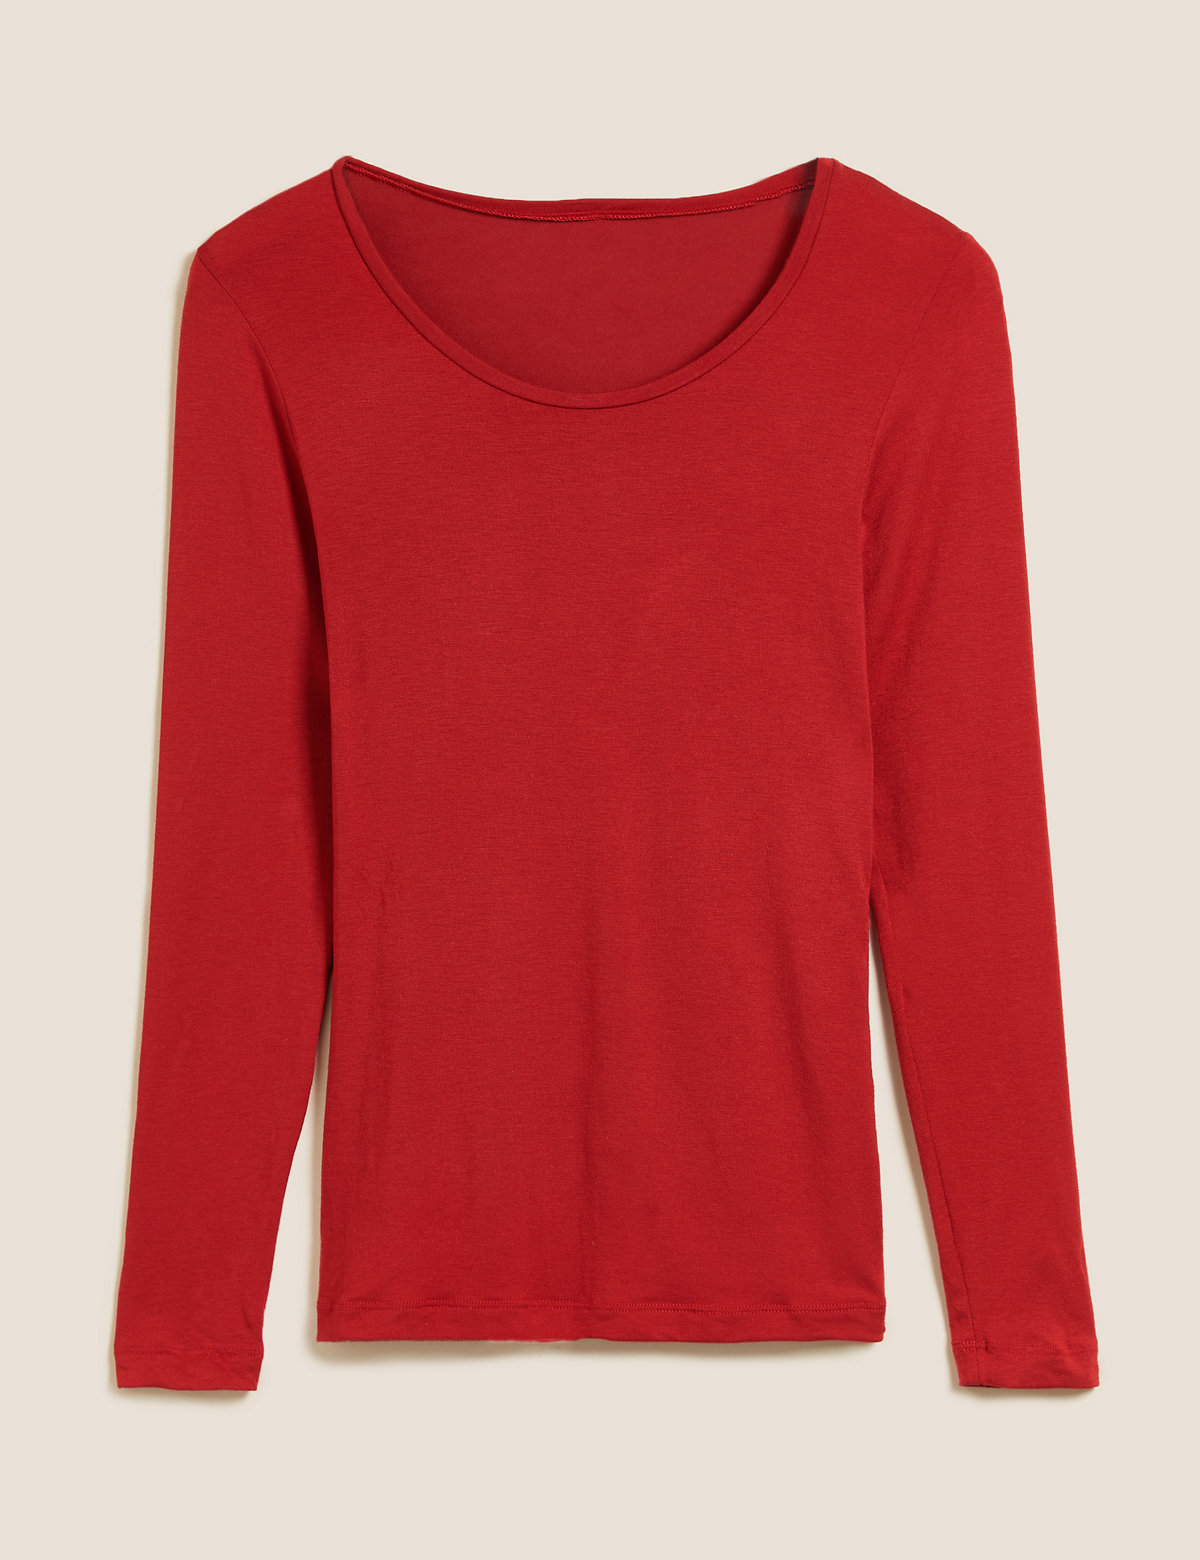 Marks and Spencer Ladies Thermal Heatgen Base Layer Tops M&S 